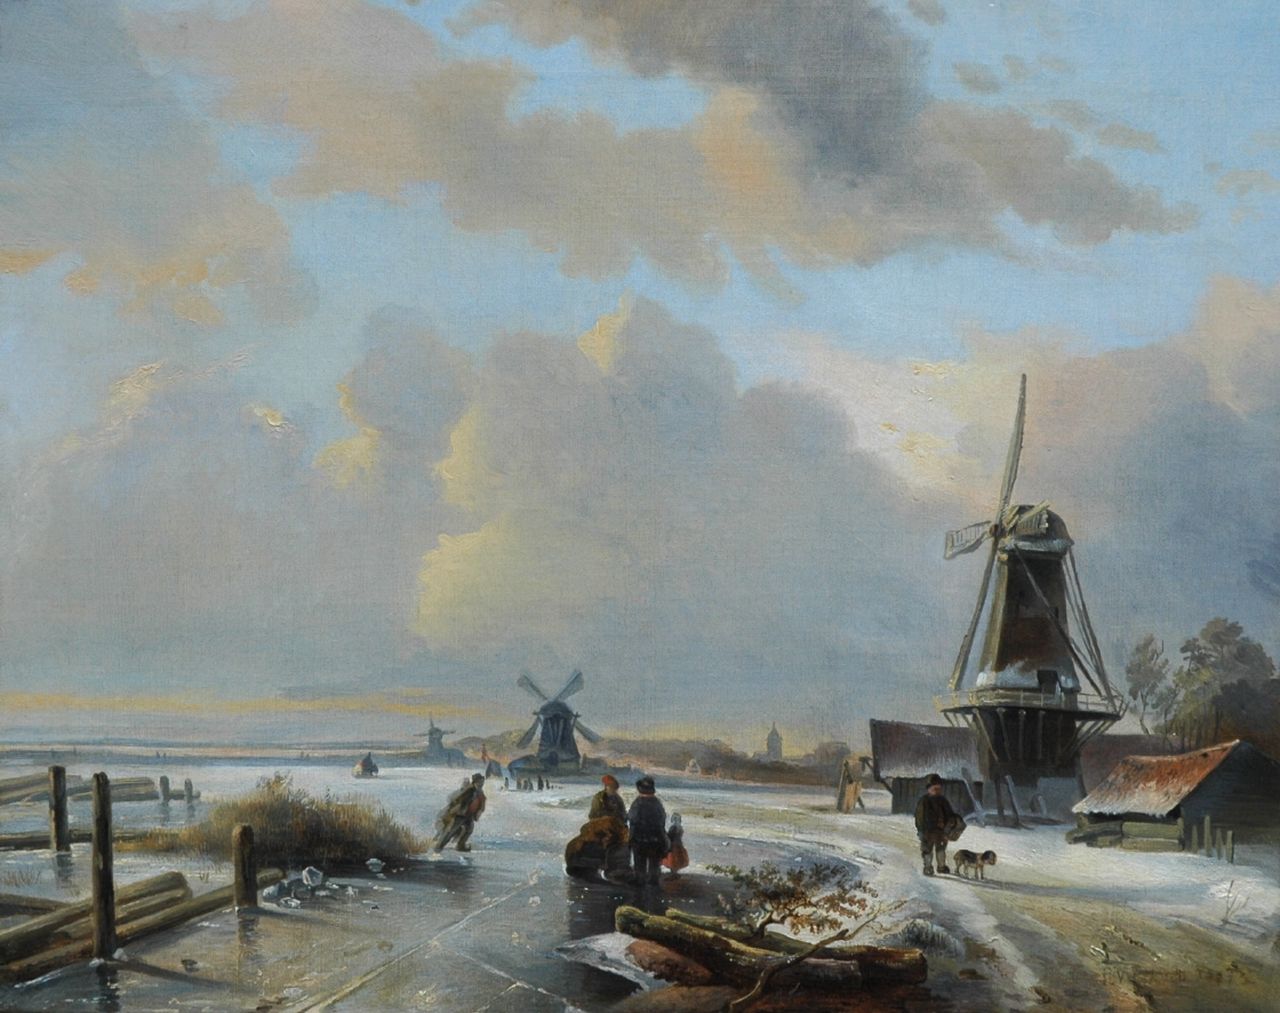 Voskuil P.  | Pieter Voskuil, A winter landscape with skaters on a frozen waterway, Öl auf Leinwand 39,1 x 48,8 cm, signed l.r. und dated 1837